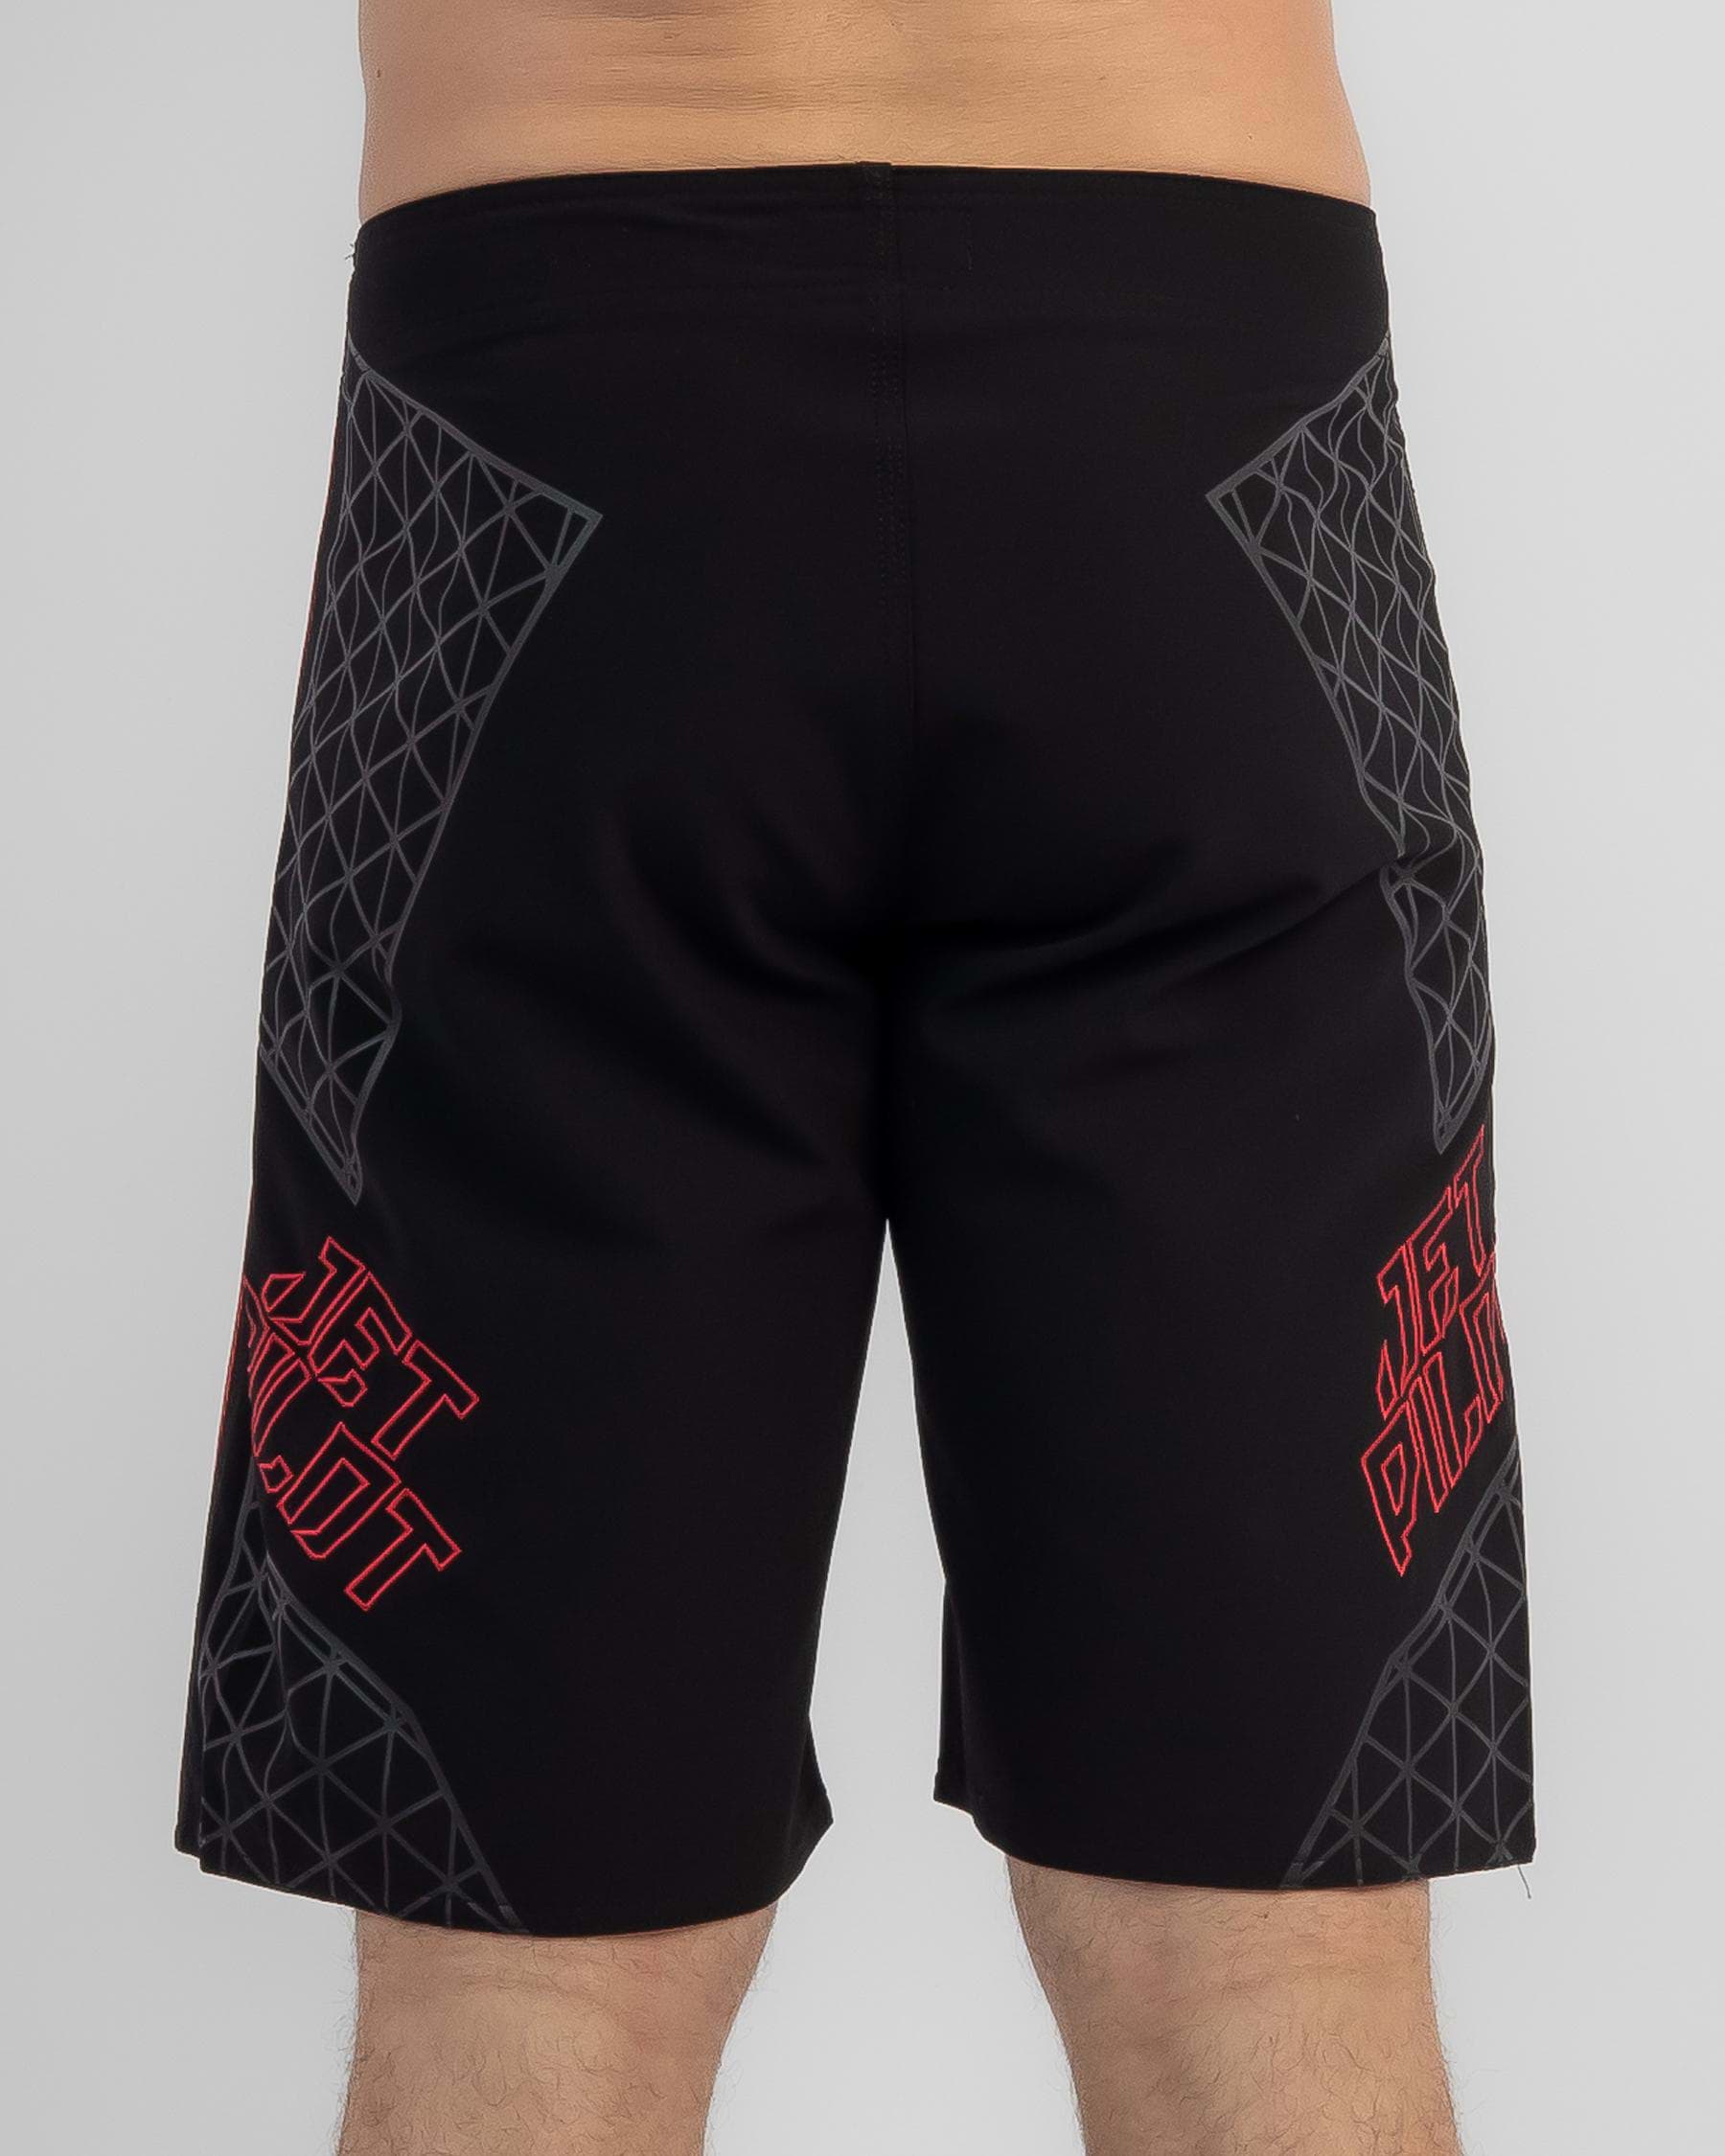 Jetpilot Full Pro Board Shorts In Blk/red - Fast Shipping & Easy ...